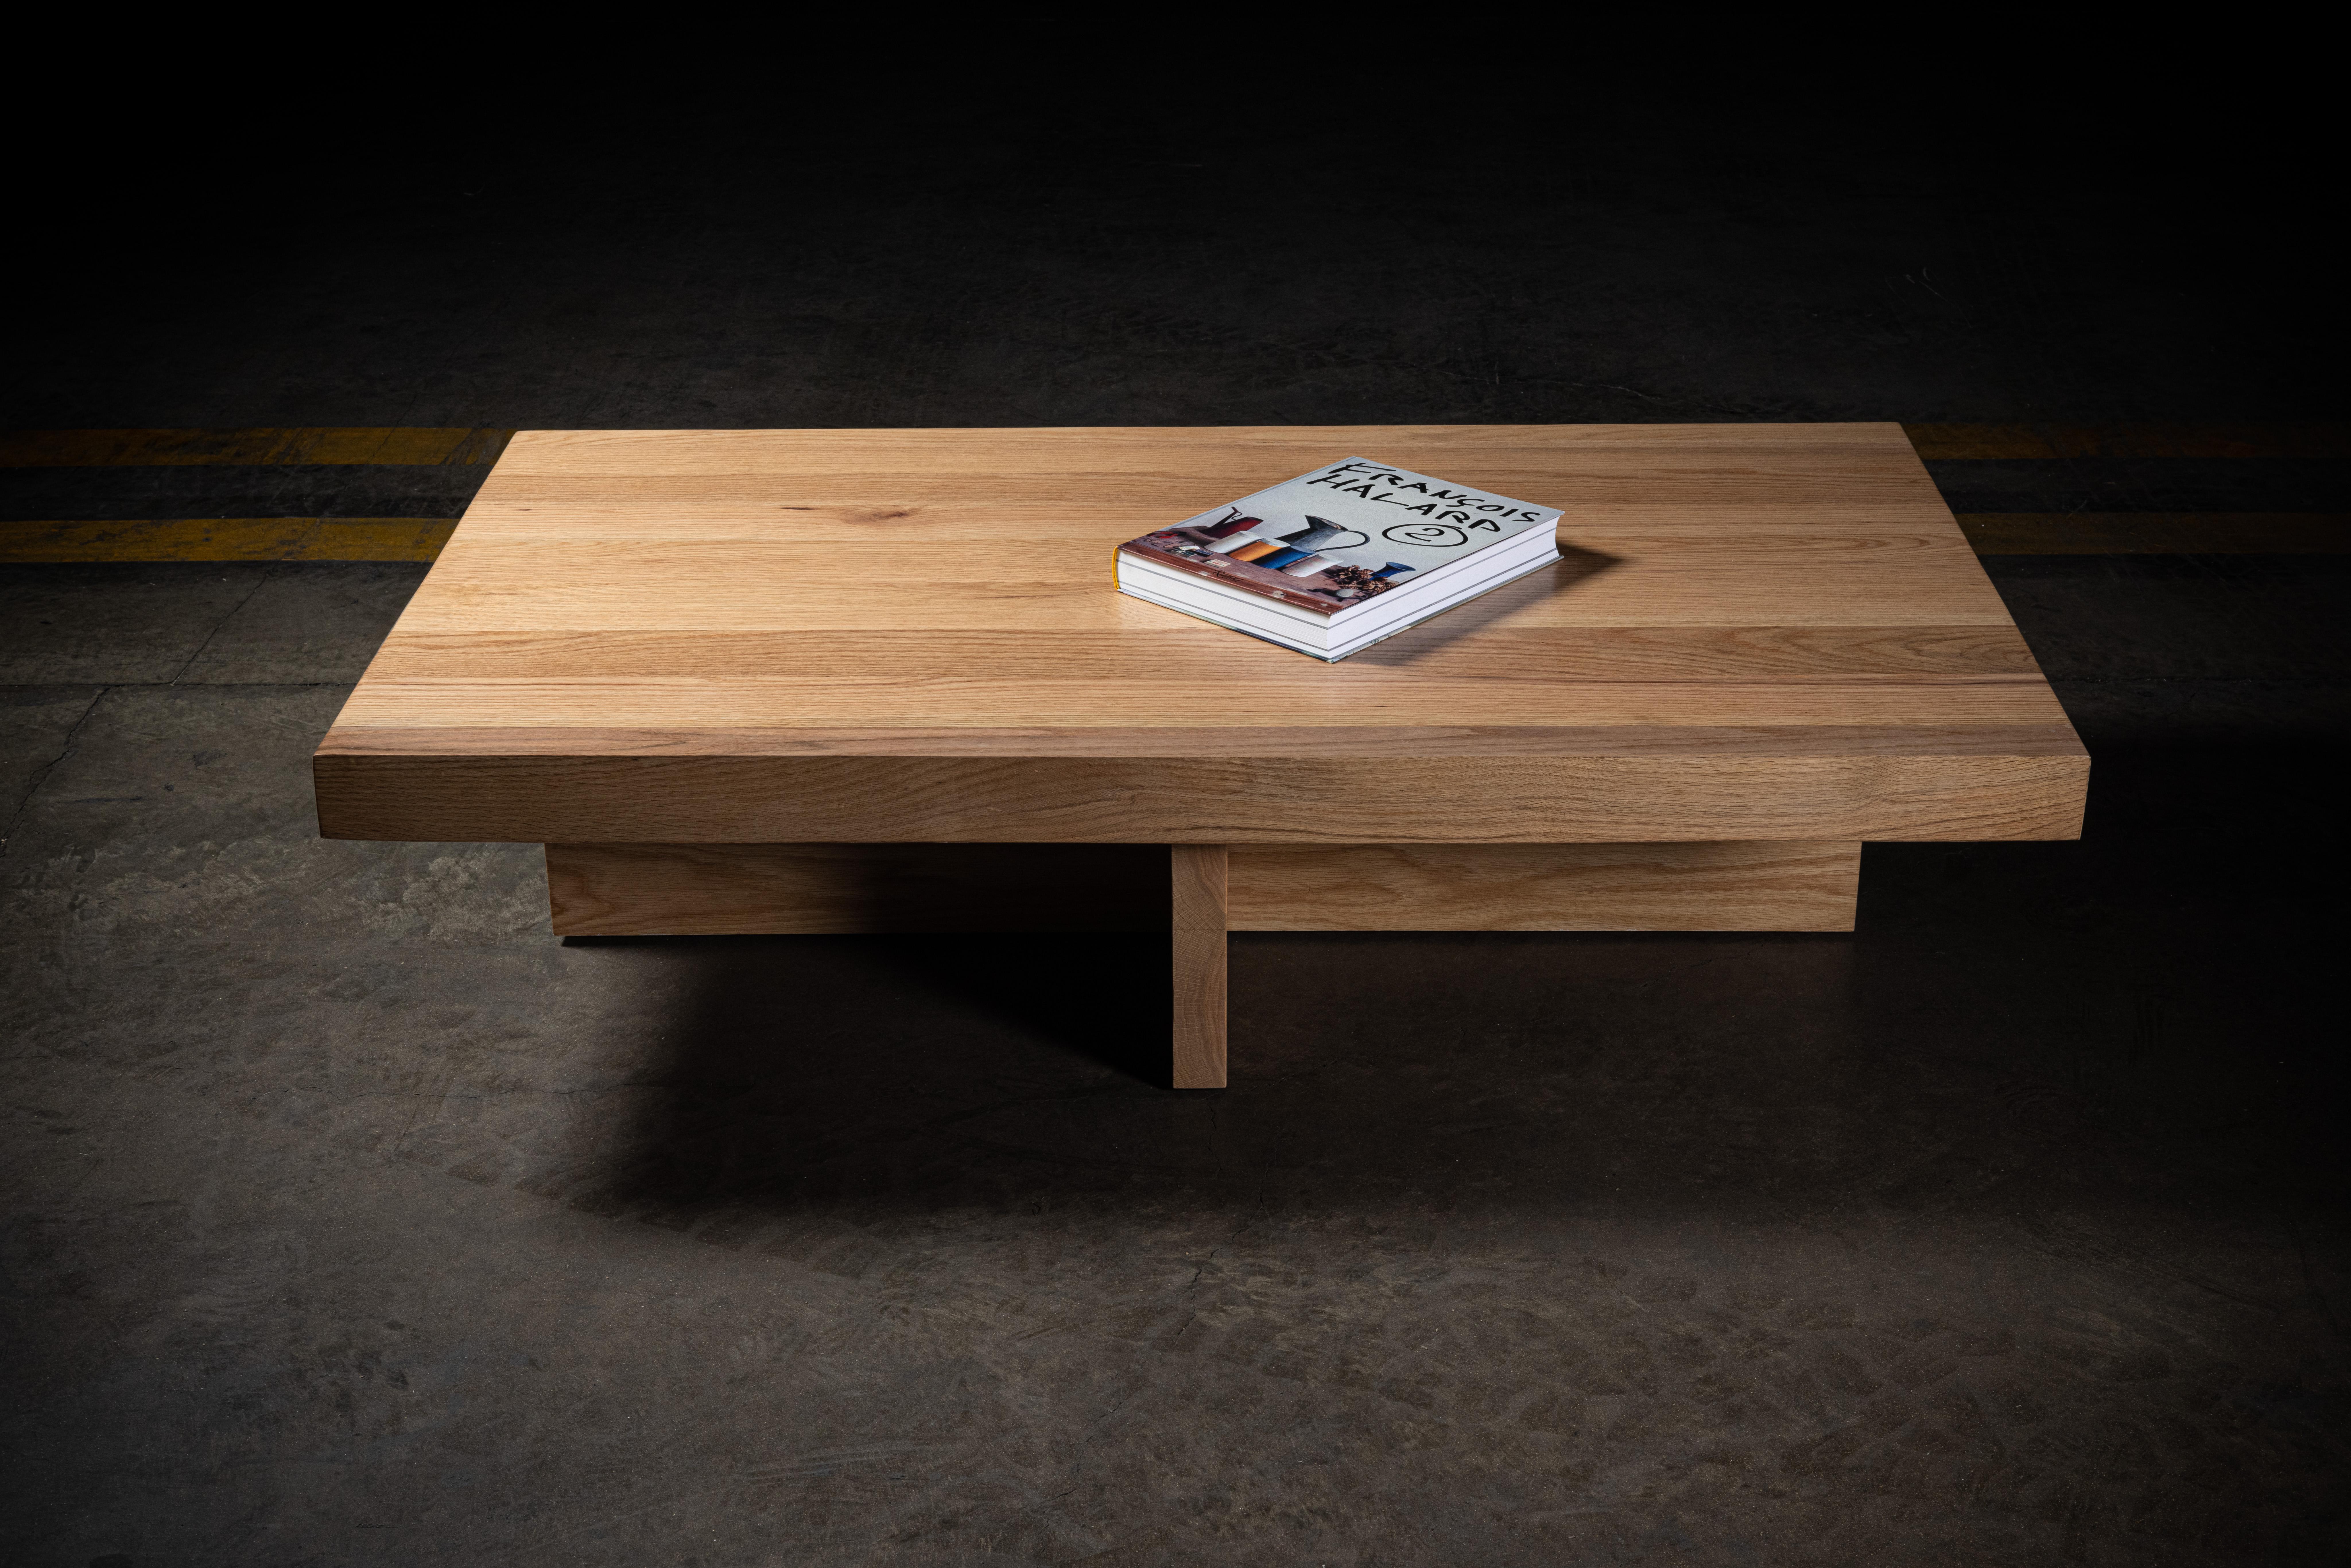 Solid oak rectangular coffee table with cross base

Measures: 3